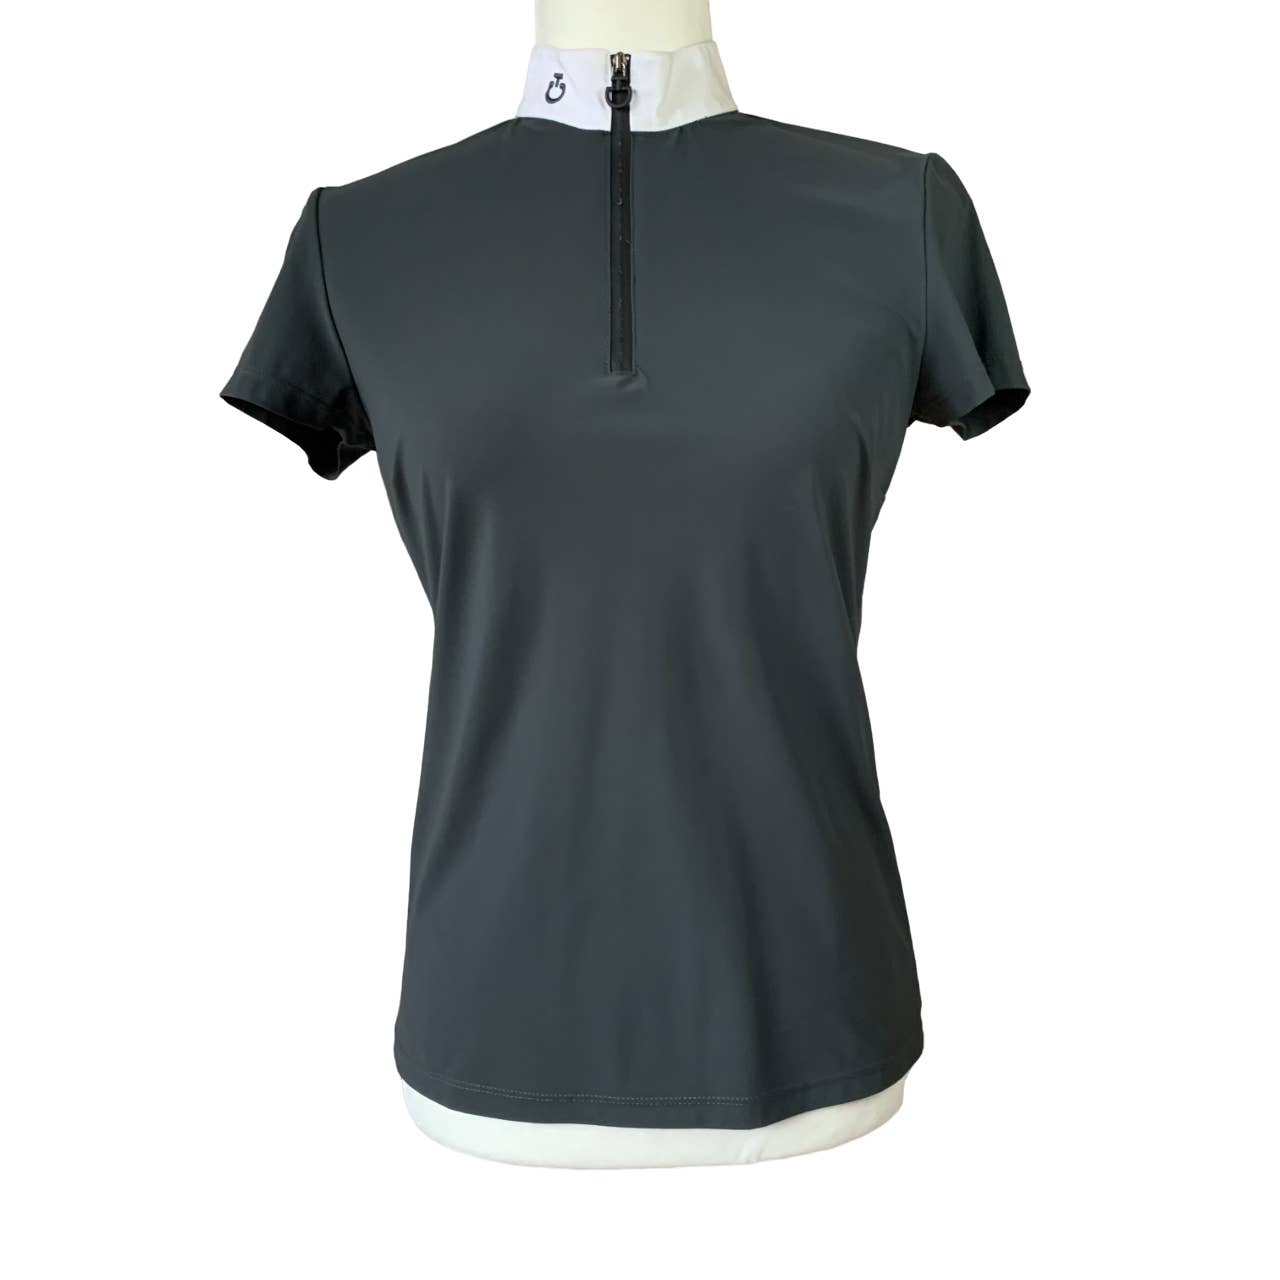 Cavalleria Toscana Short Sleeved Riding Competition Shirt